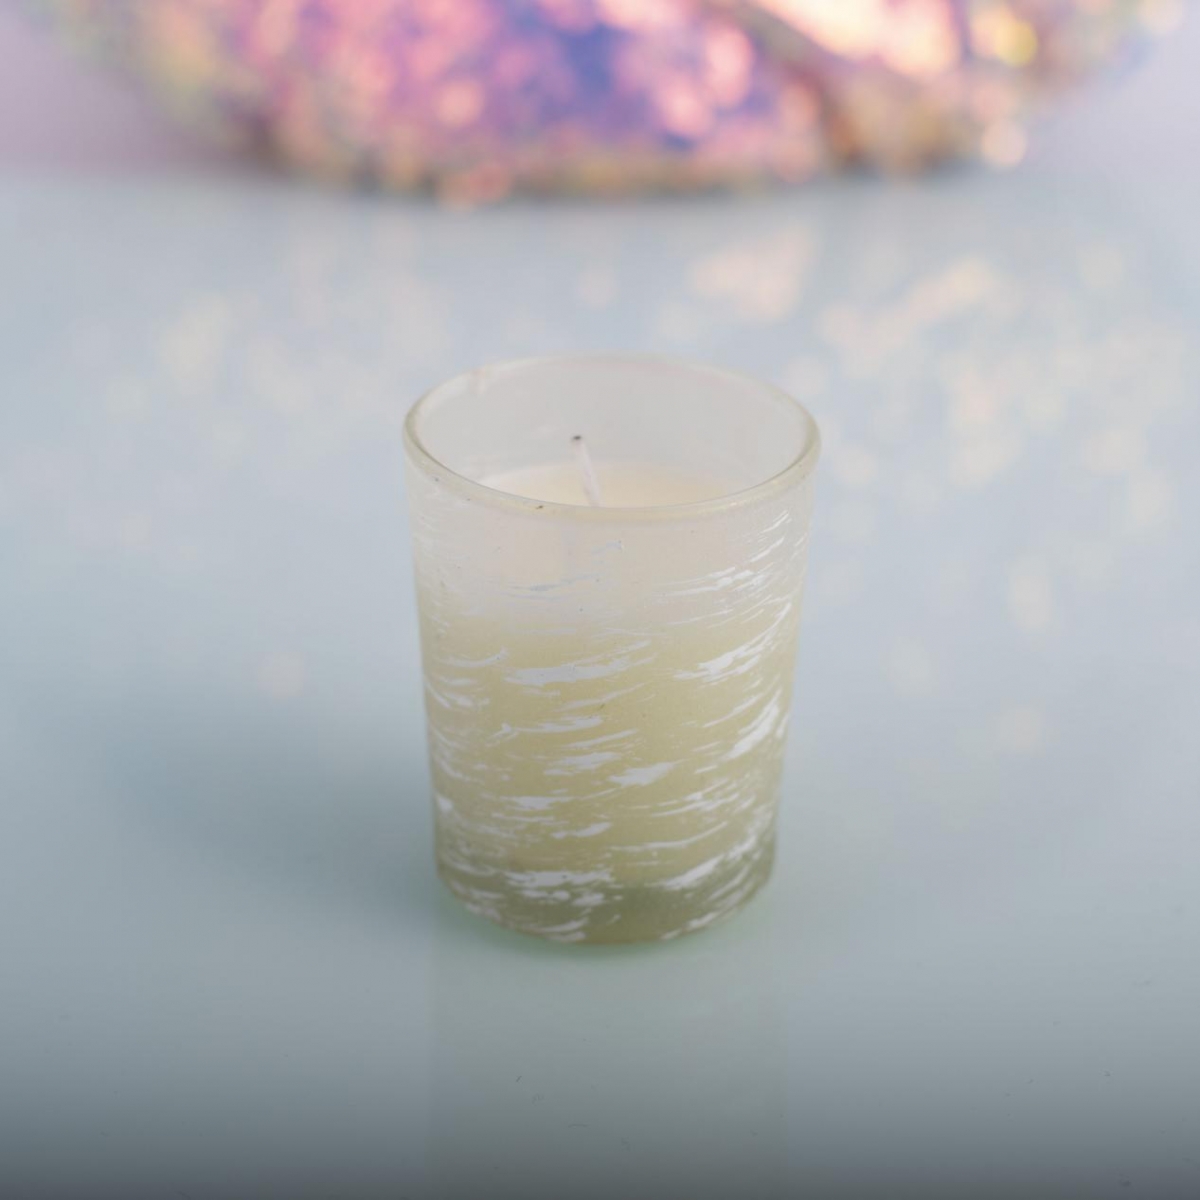 Scented Candles : White Candles ,Mini Glass Candles, Peace Of Mind ,China Factory , Cheap Price-HOWCANDLE-Candles,Scented Candles,Aromatherapy Candles,Soy Candles,Vegan Candles,Jar Candles,Pillar Candles,Candle Gift Sets,Essential Oils,Reed Diffuser,Candle Holder,